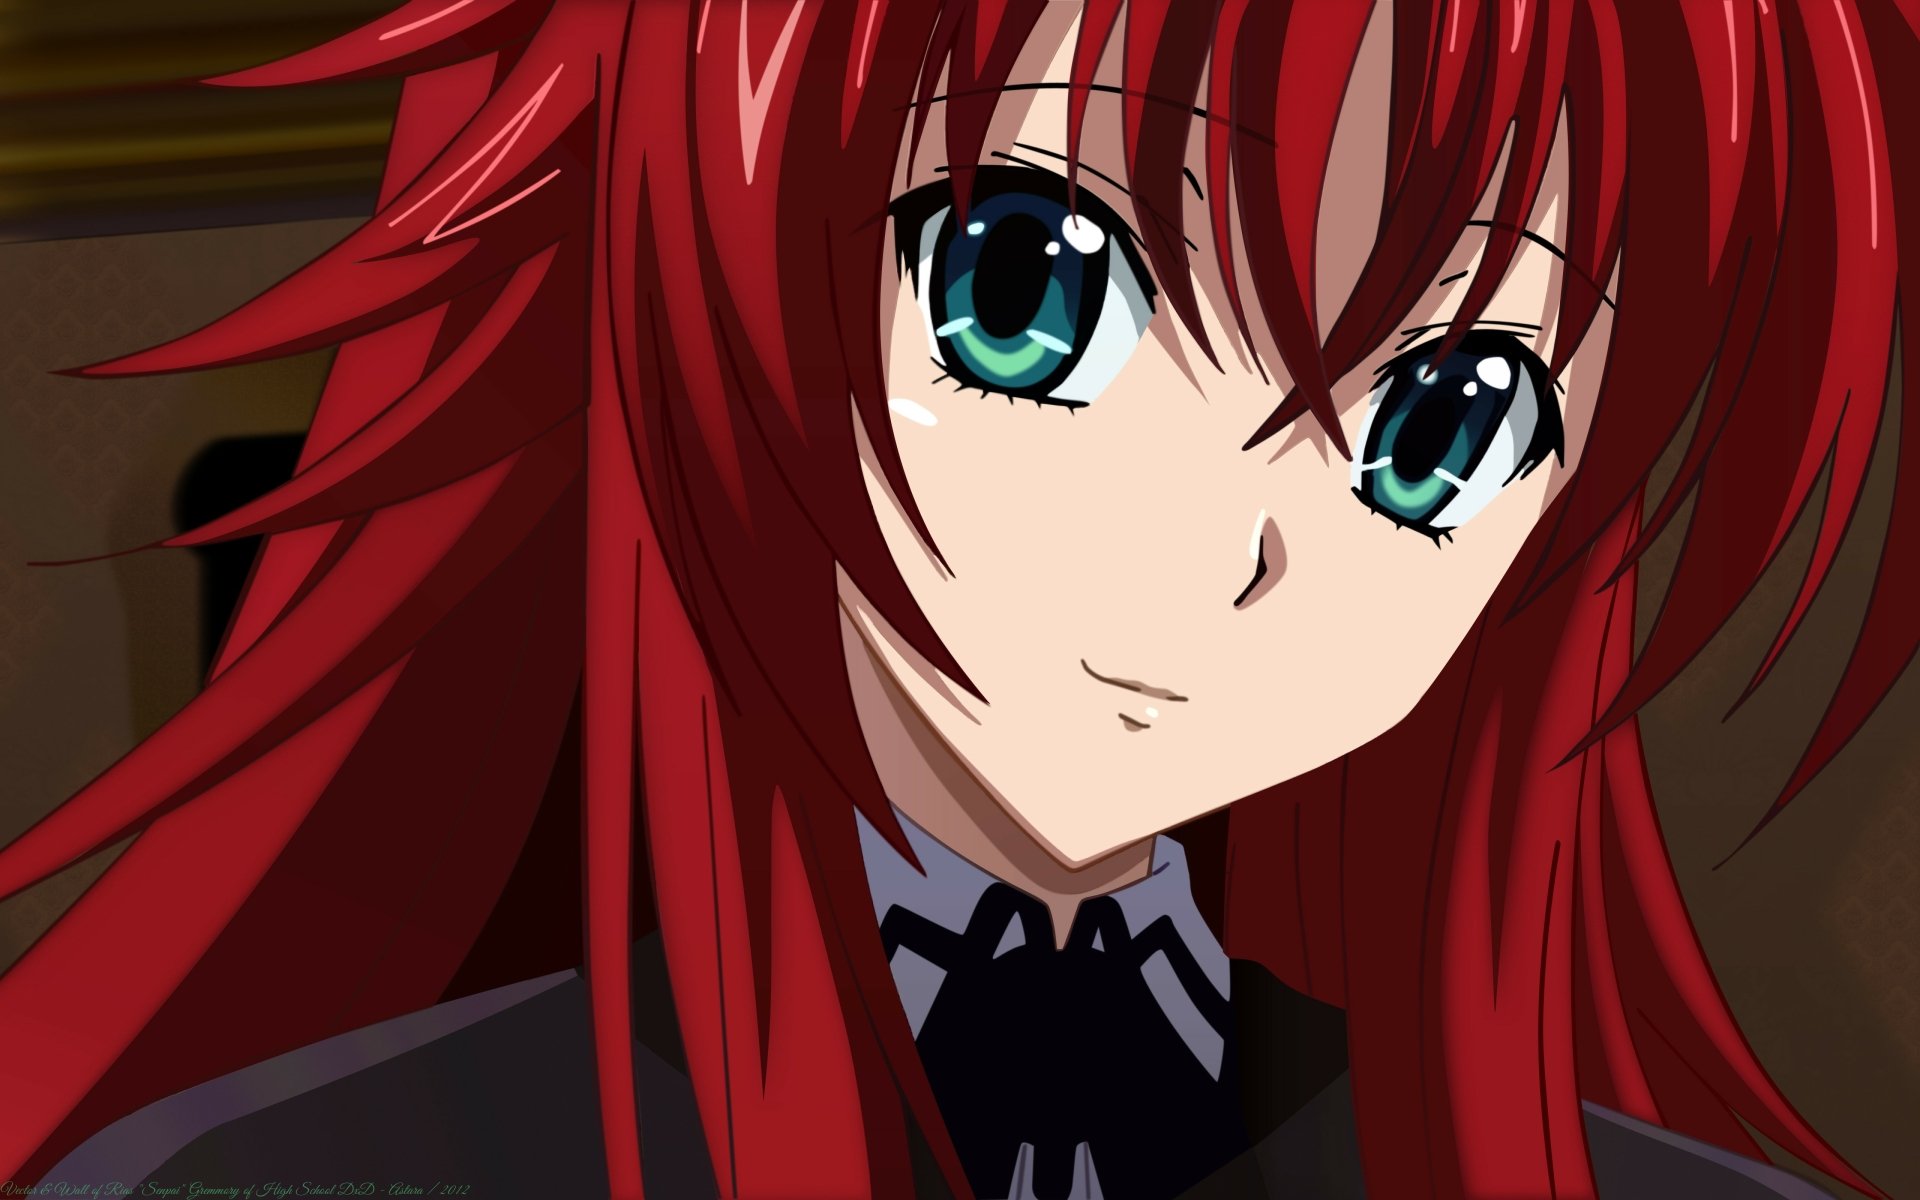 9. Rias Gremory from High School DxD - wide 5